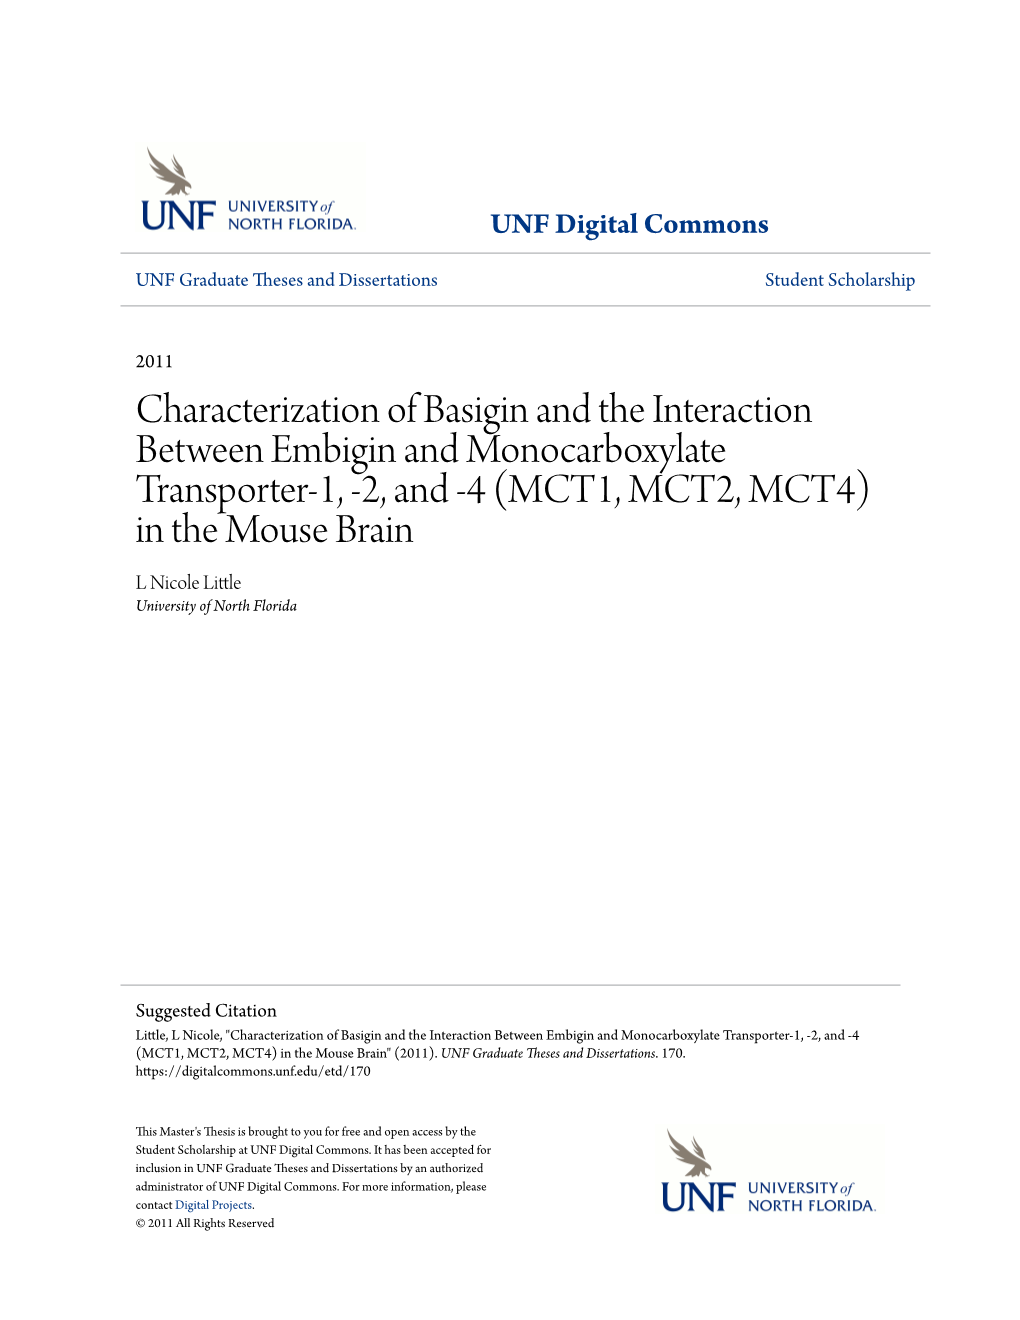 Characterization of Basigin and the Interaction